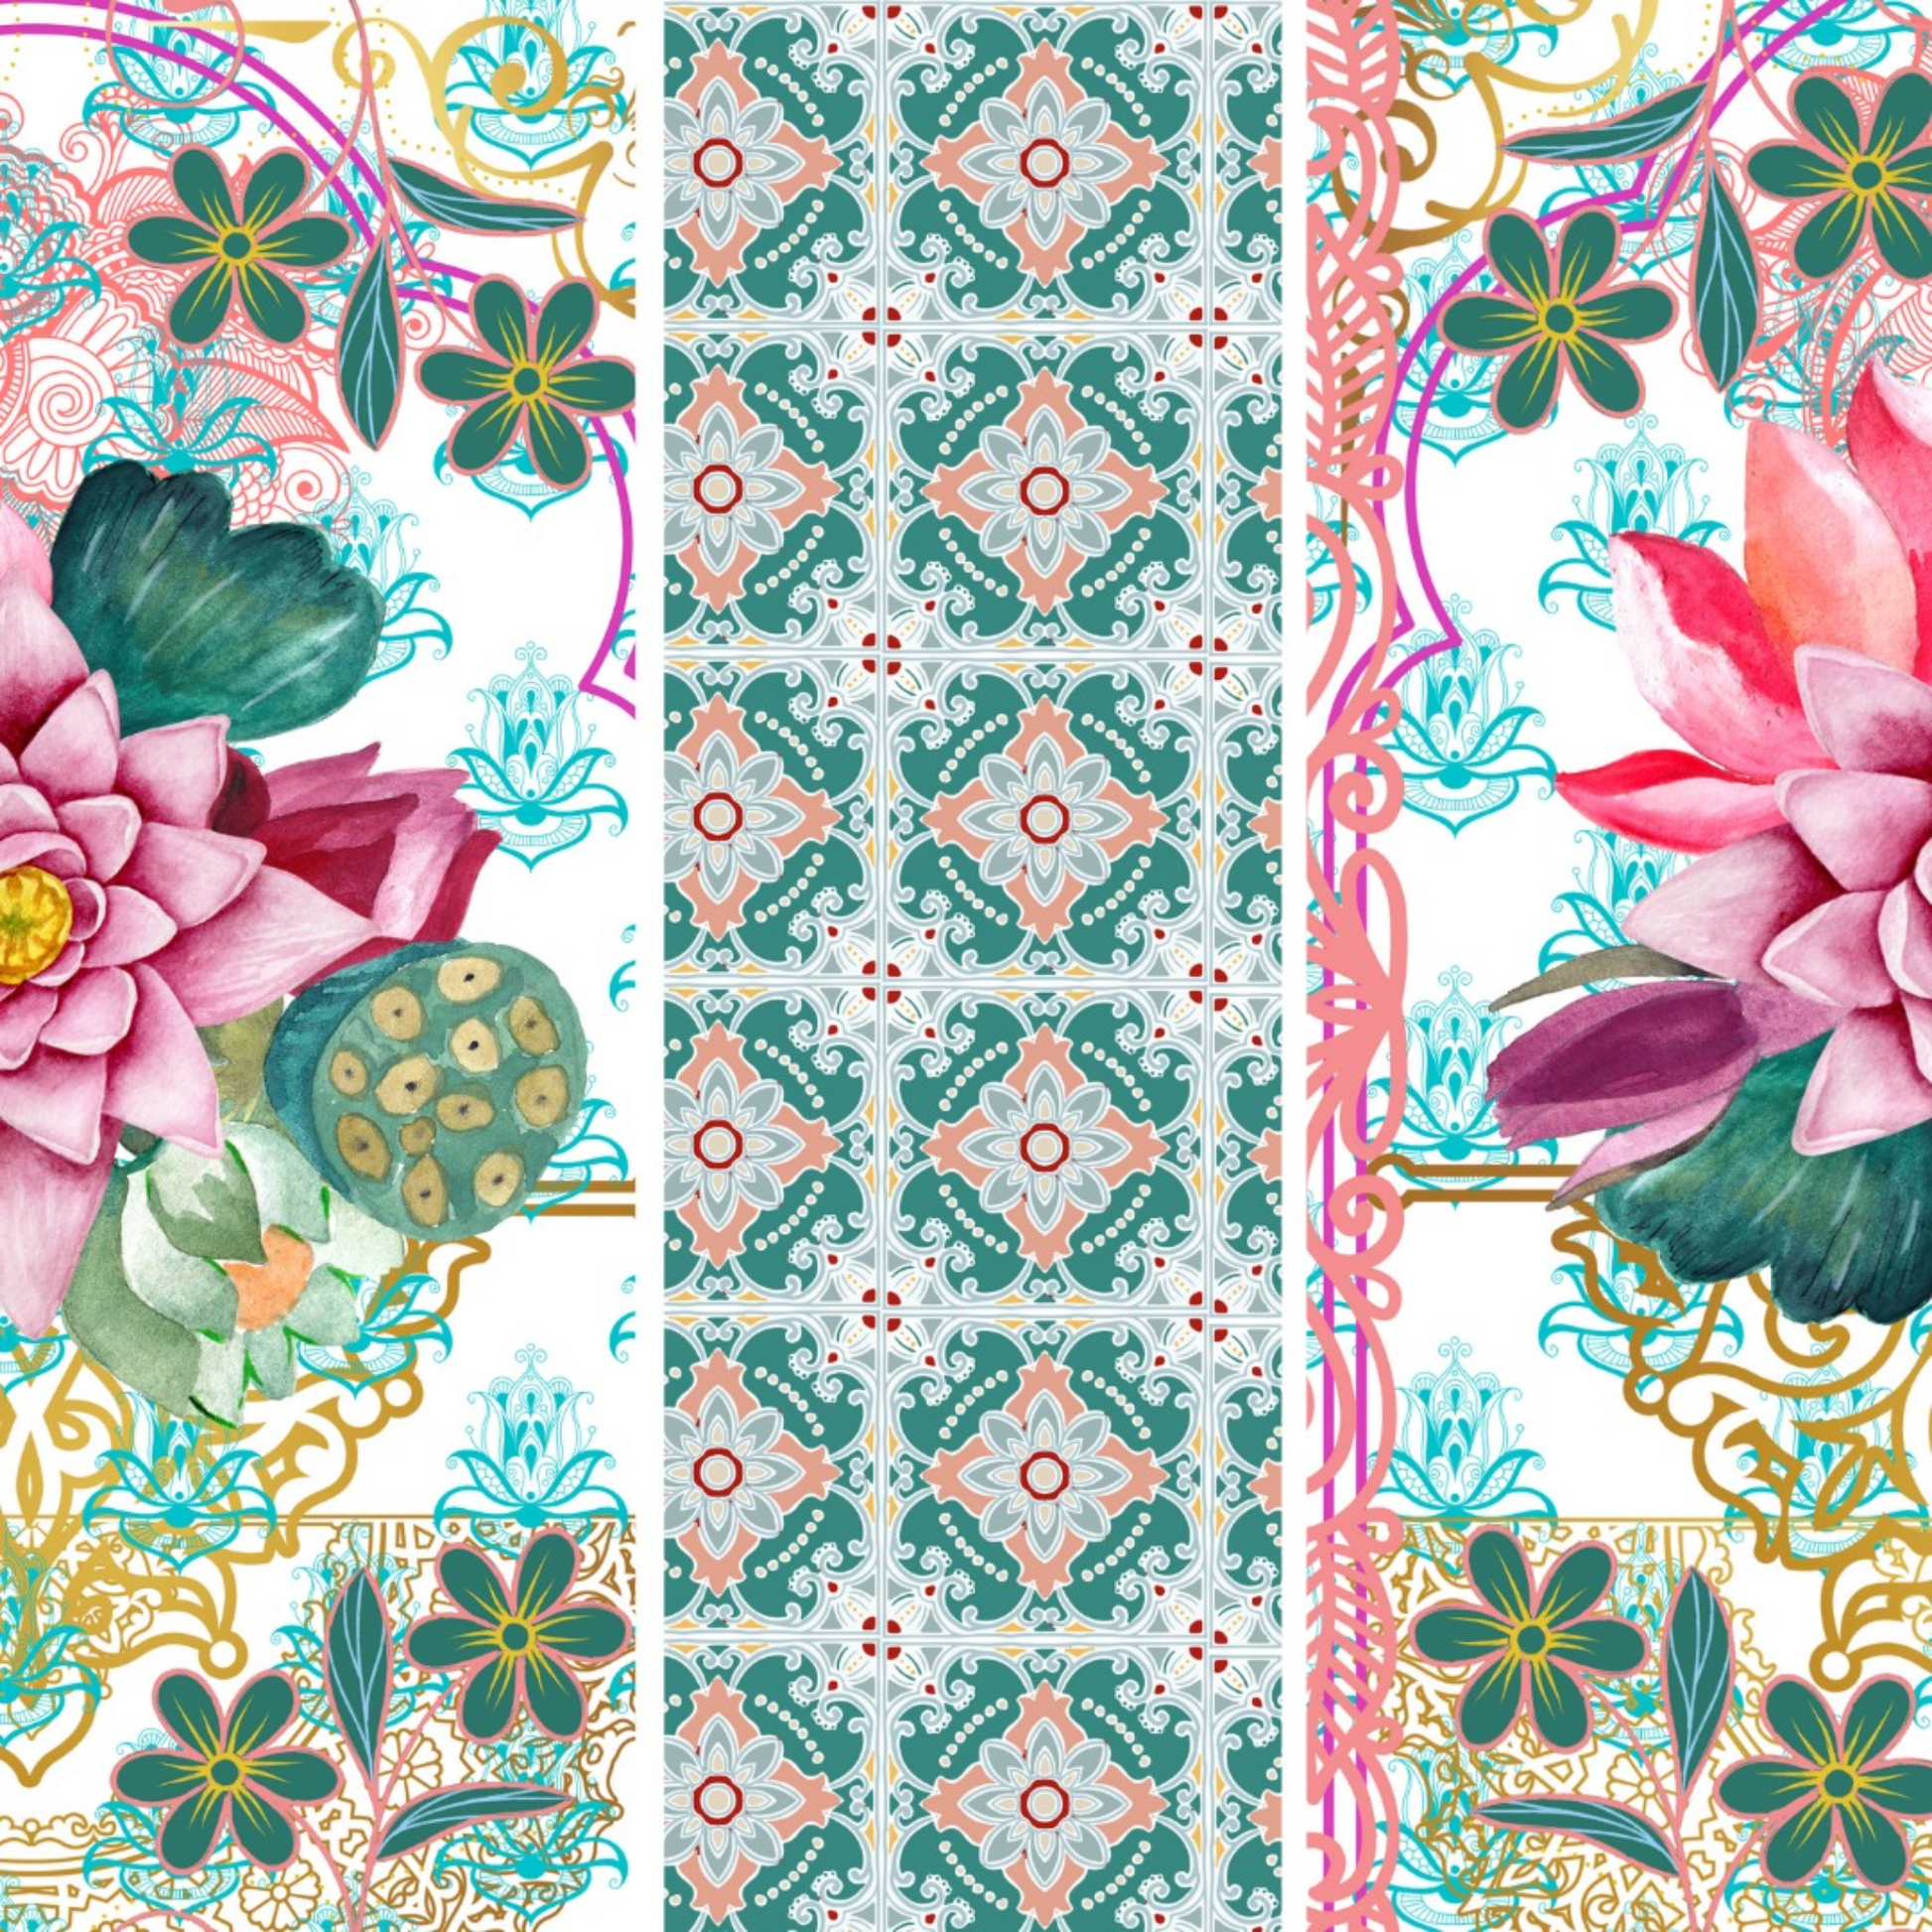 "Lotus Love" decoupage paper set by Made by Marley available at Milton's Daughter. Combo photo features 3 designs included in 3 sheet set in Size A3.